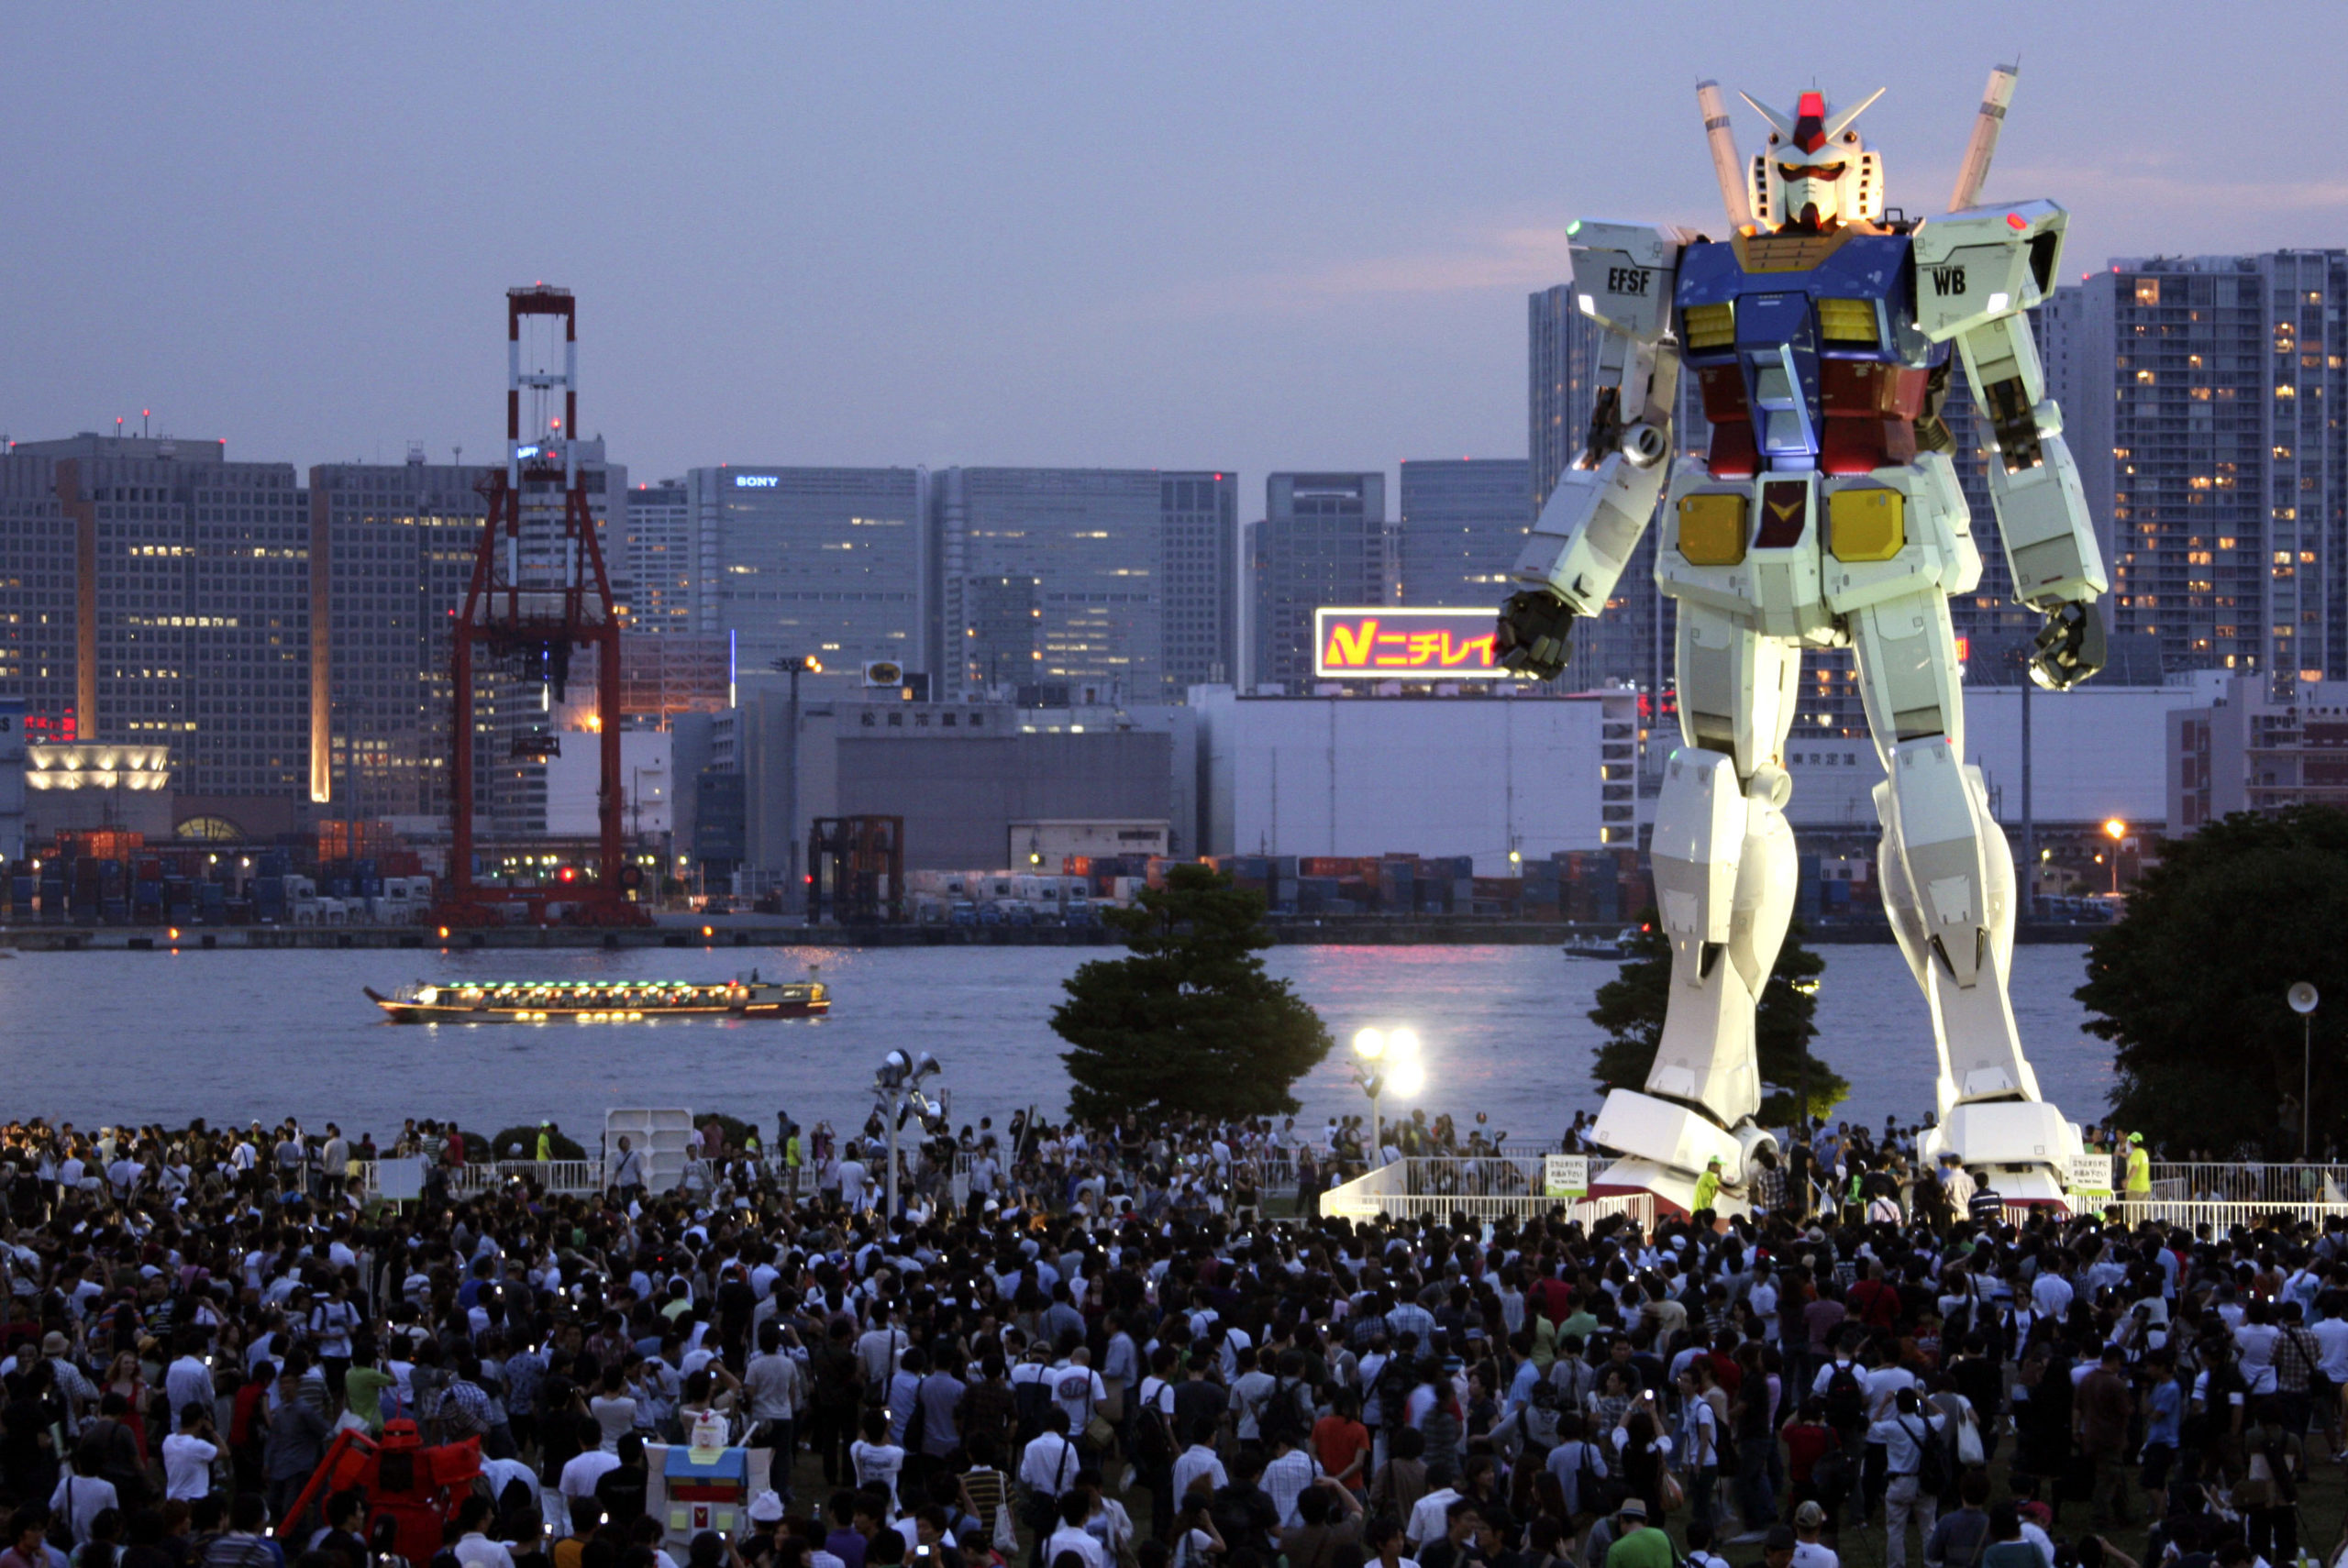 8 Reasons Why The Tokyo Olympics Will Be The Most Futuristic Ever